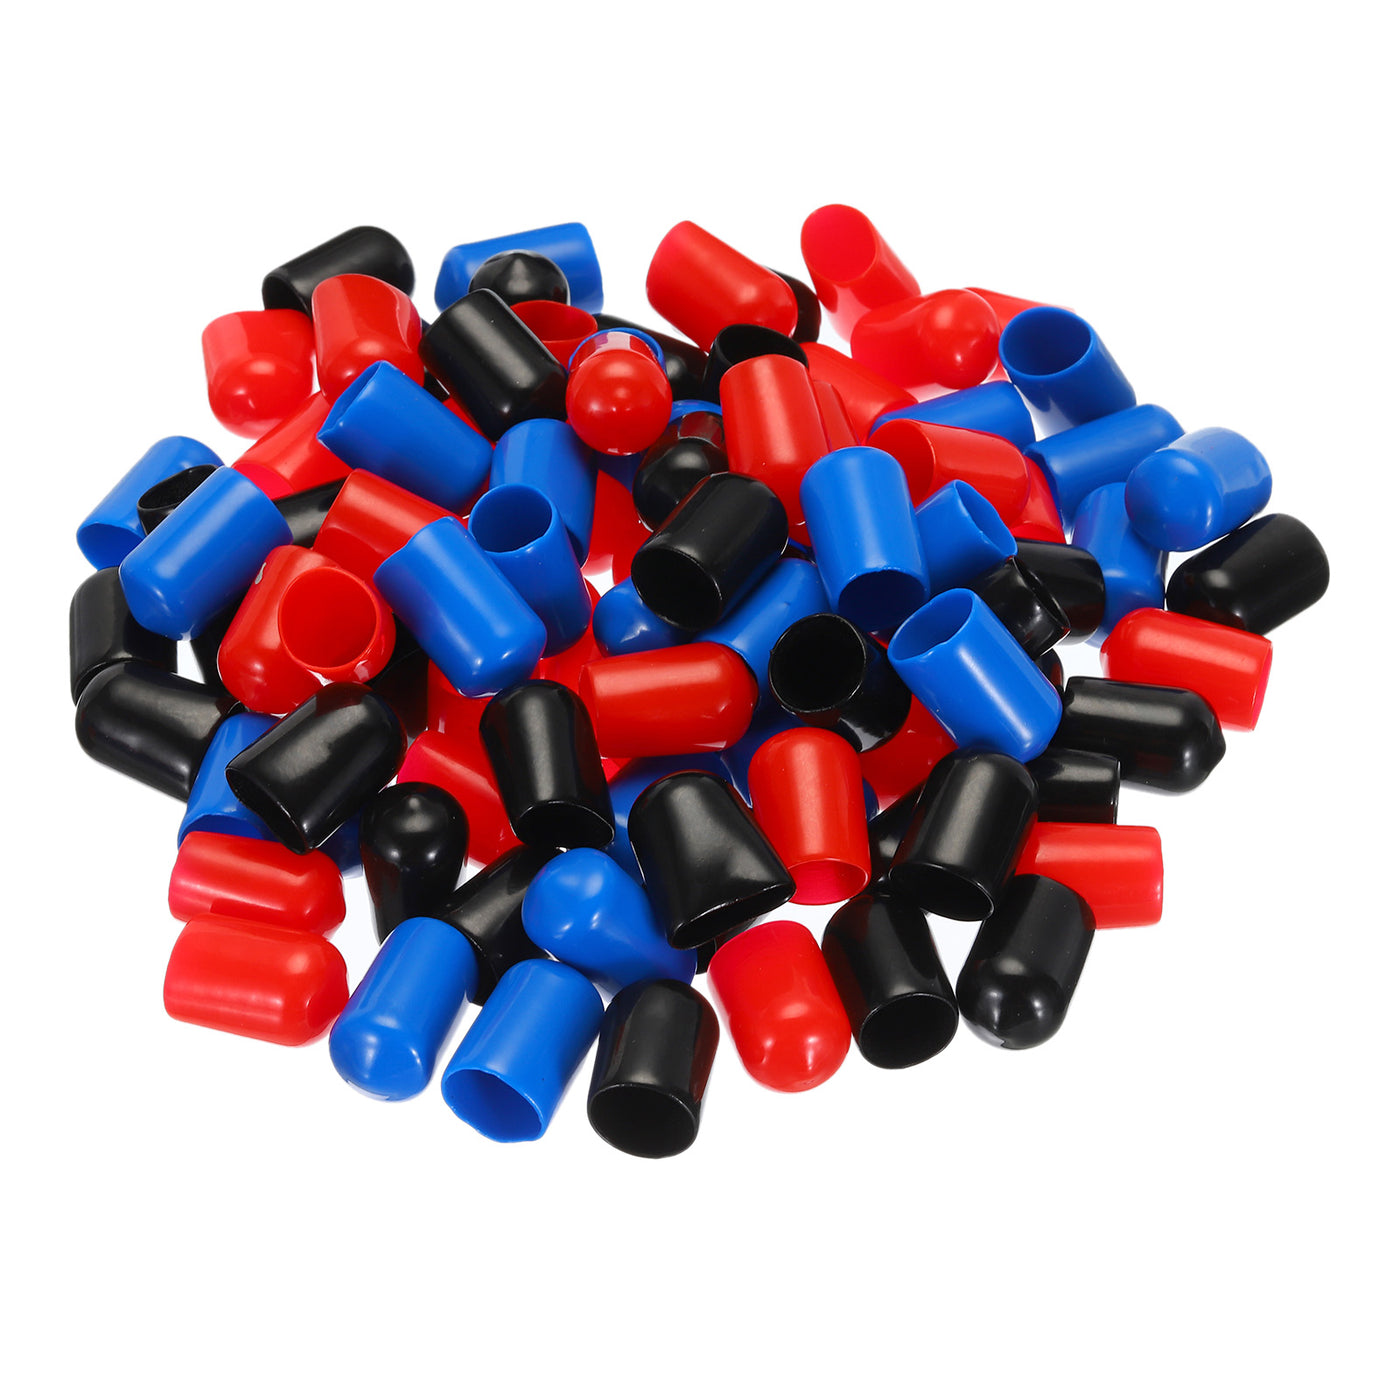 uxcell Uxcell 180pcs Rubber End Caps 14mm ID Vinyl PVC Round Tube Bolt Cap Cover Screw Thread Protectors, Black Red Blue